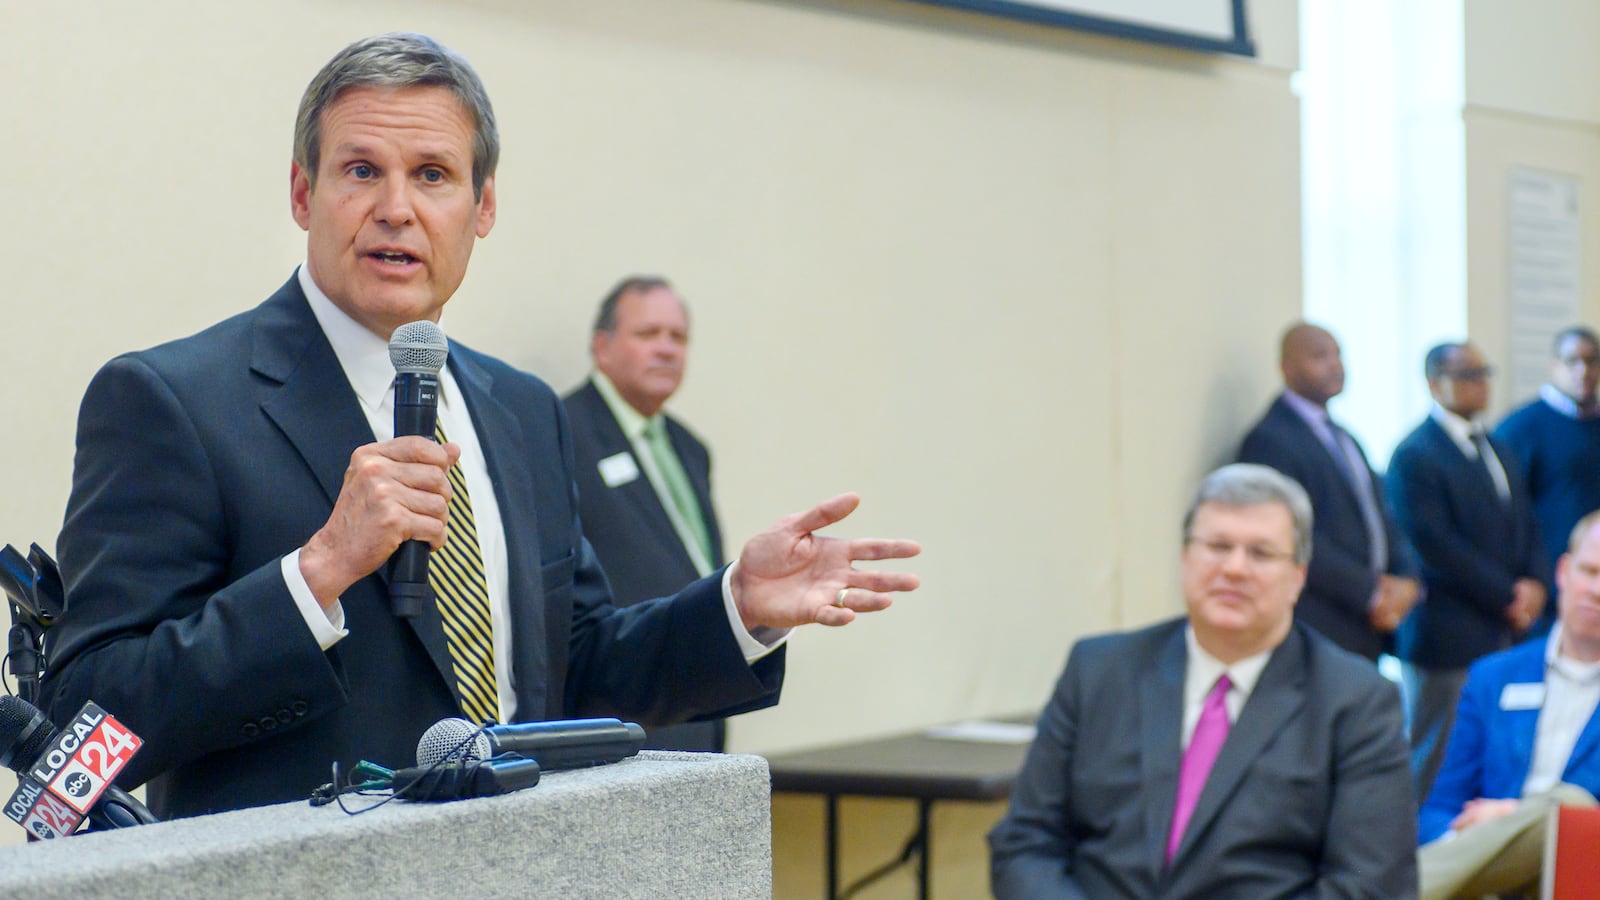 Gov. Bill Lee came to Memphis to announce a new certification program for construction jobs for Shelby County Schools students.